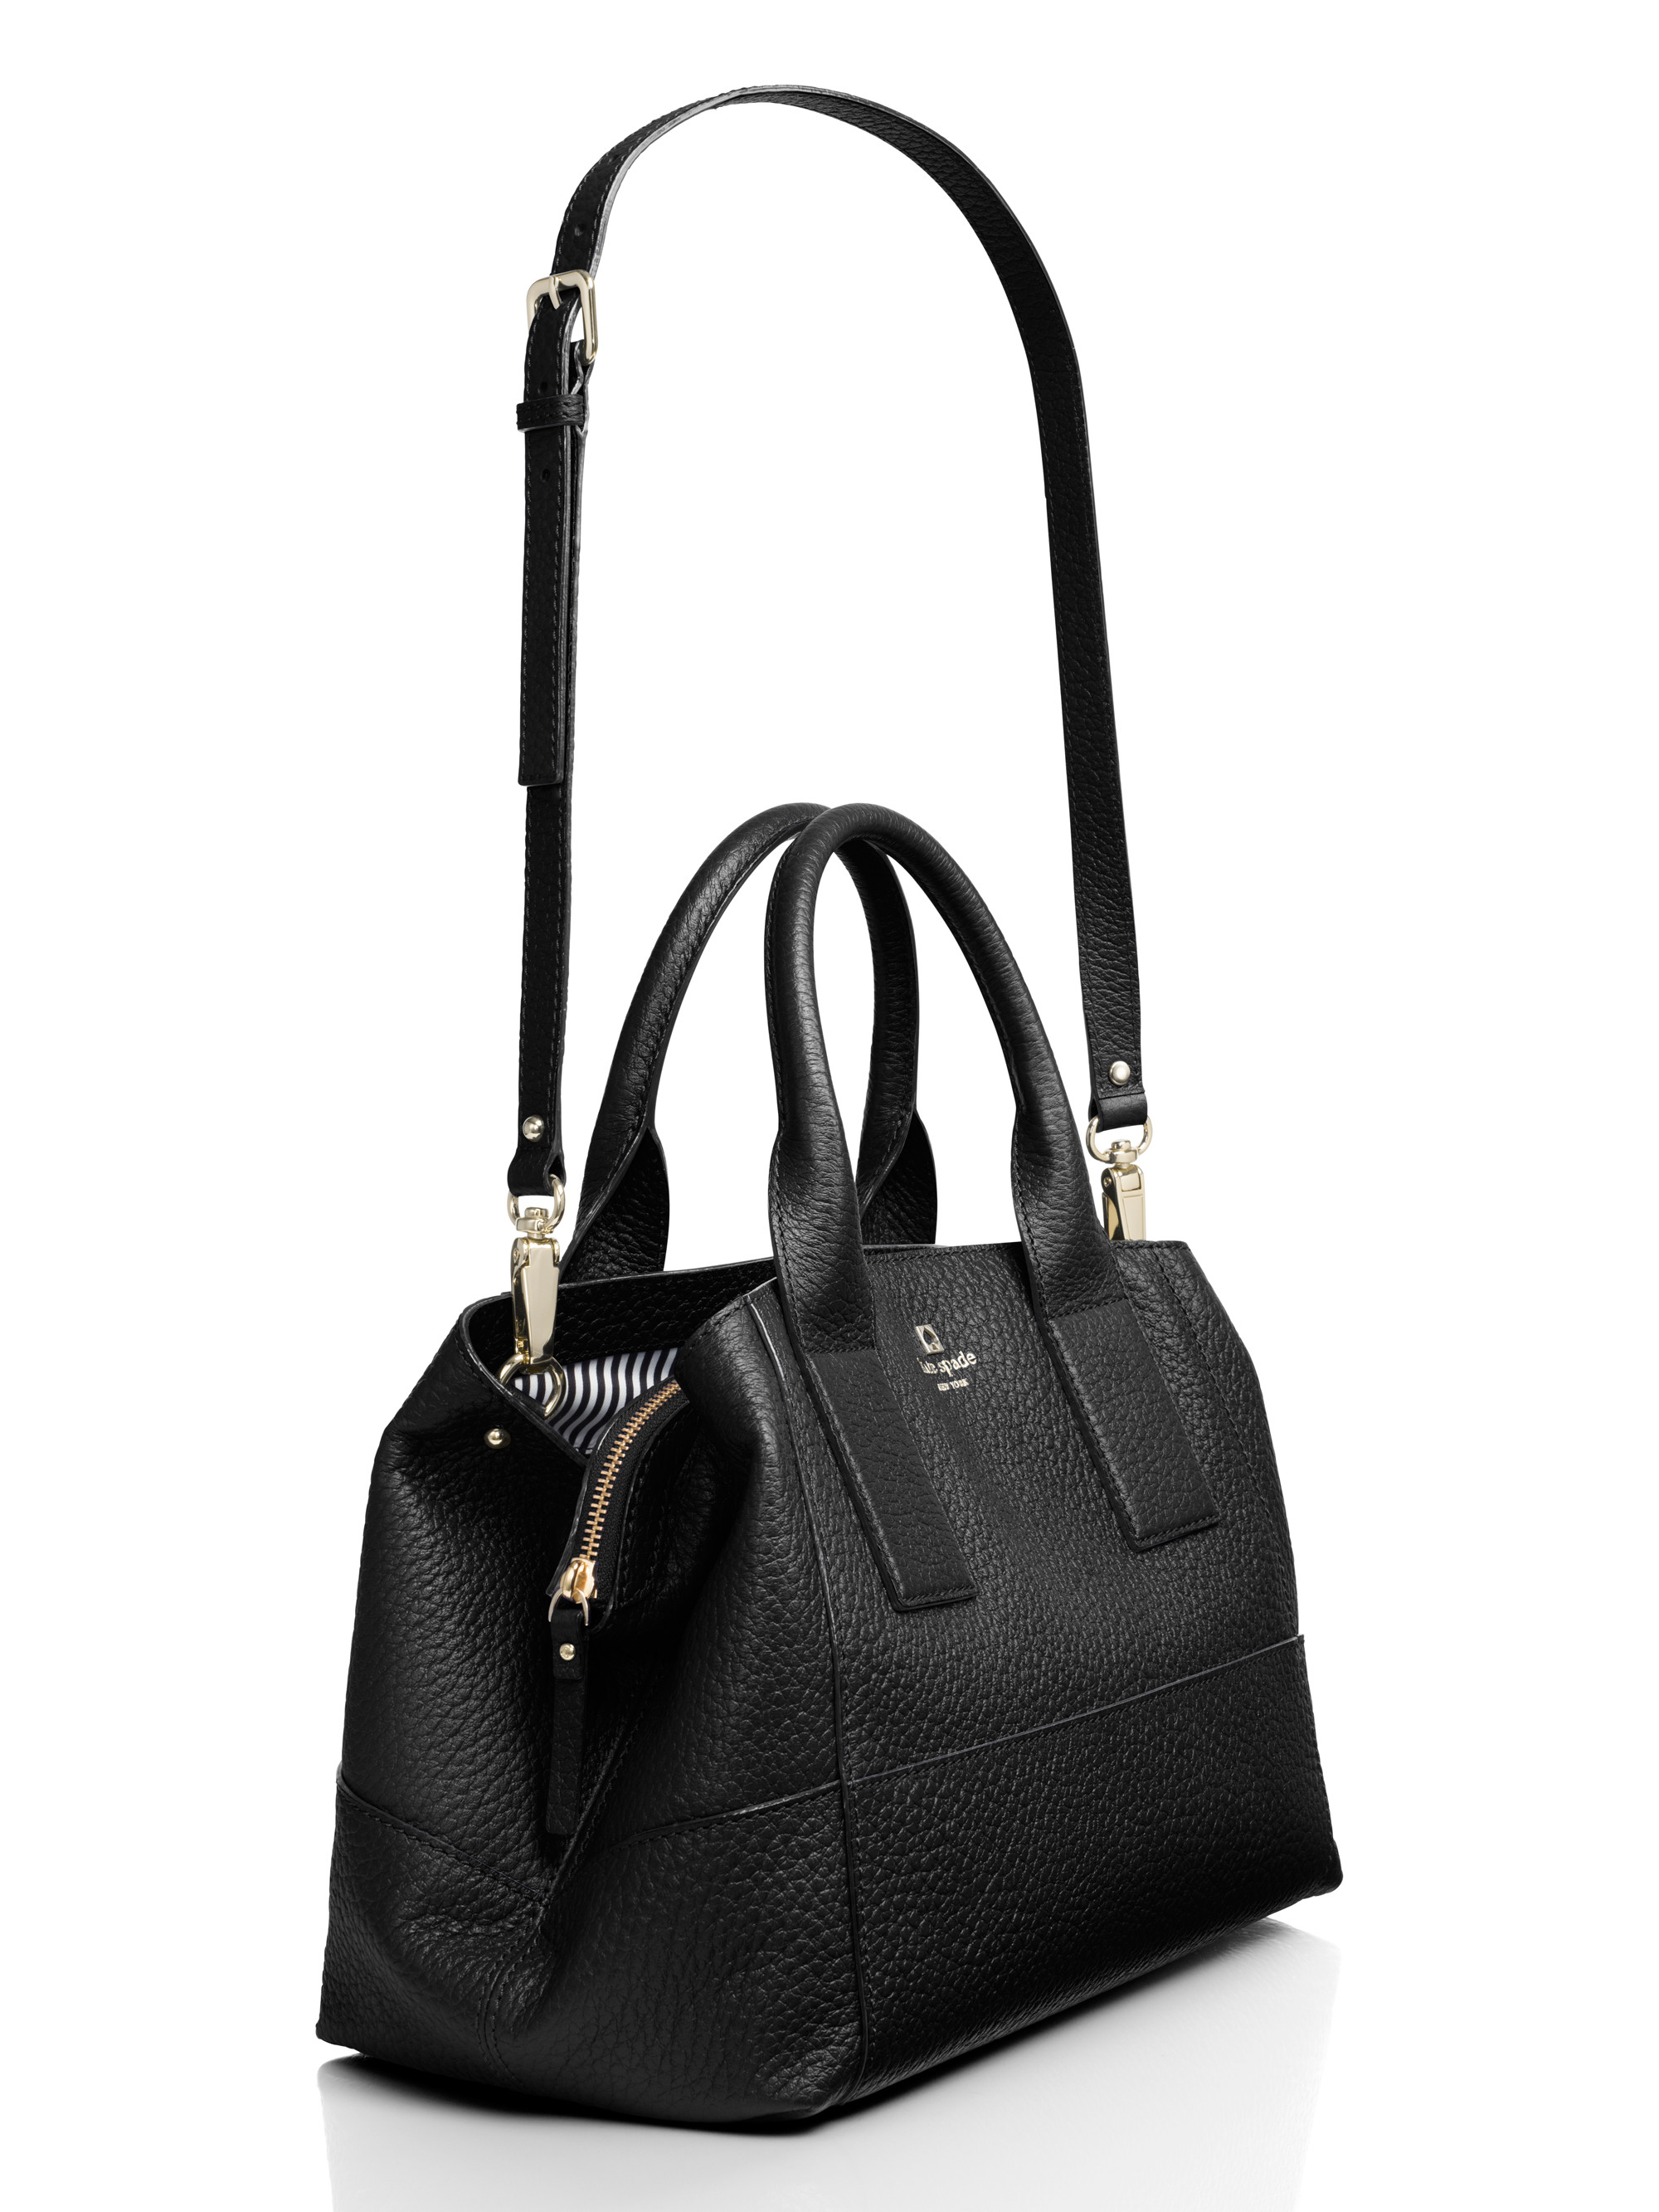 Kate spade new york Southport Avenue Sloan Leather Tote in Black | Lyst